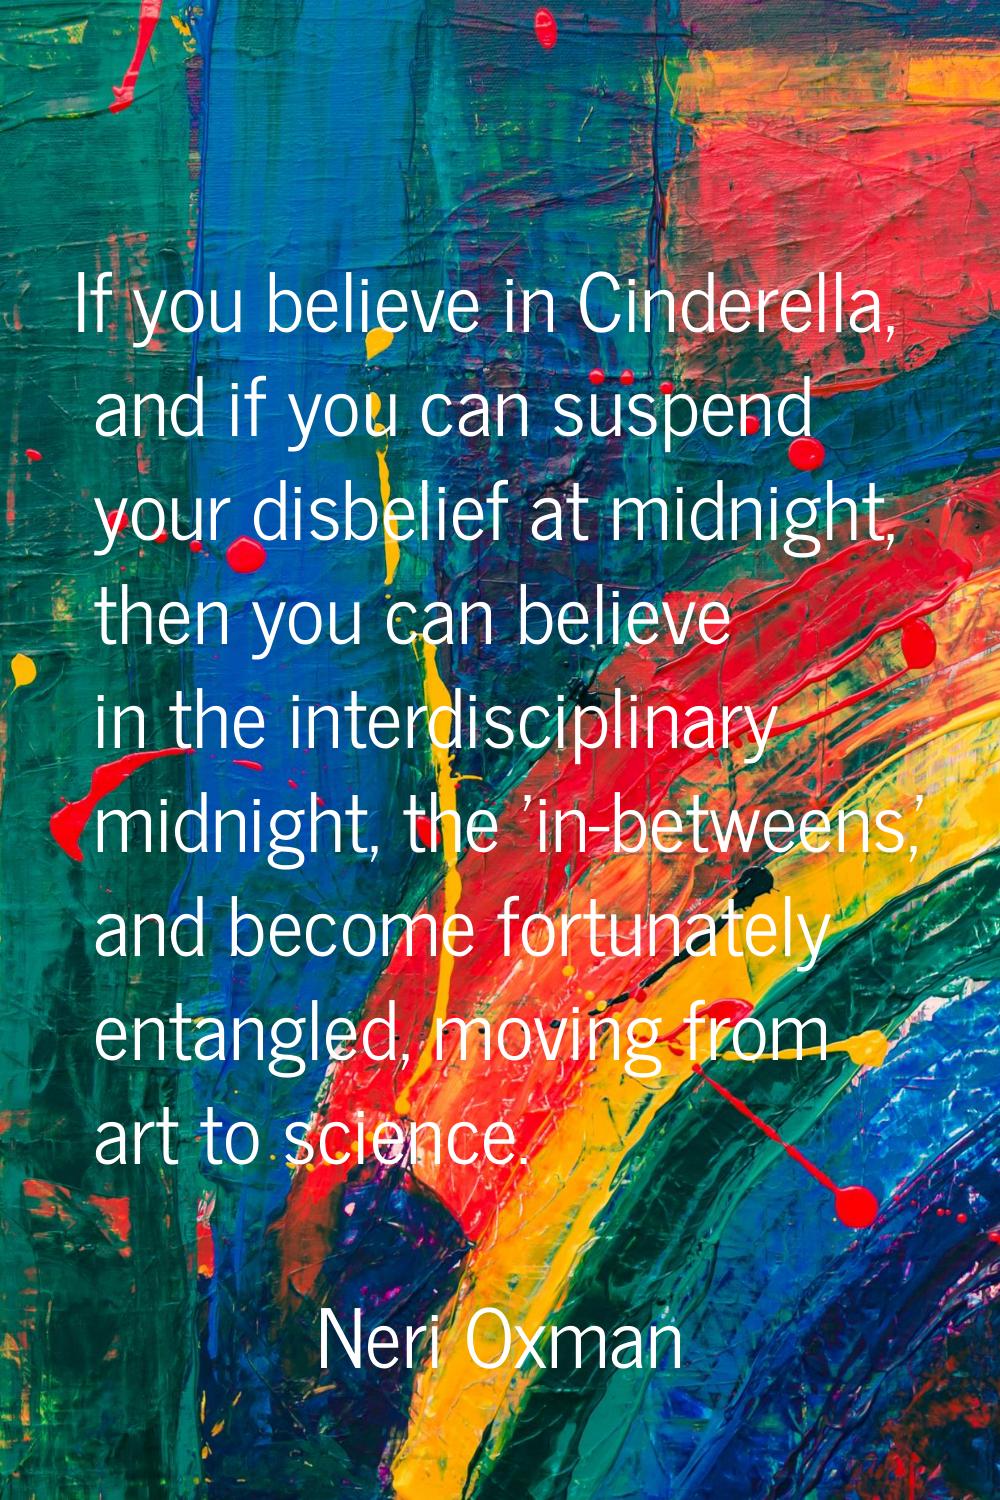 If you believe in Cinderella, and if you can suspend your disbelief at midnight, then you can belie